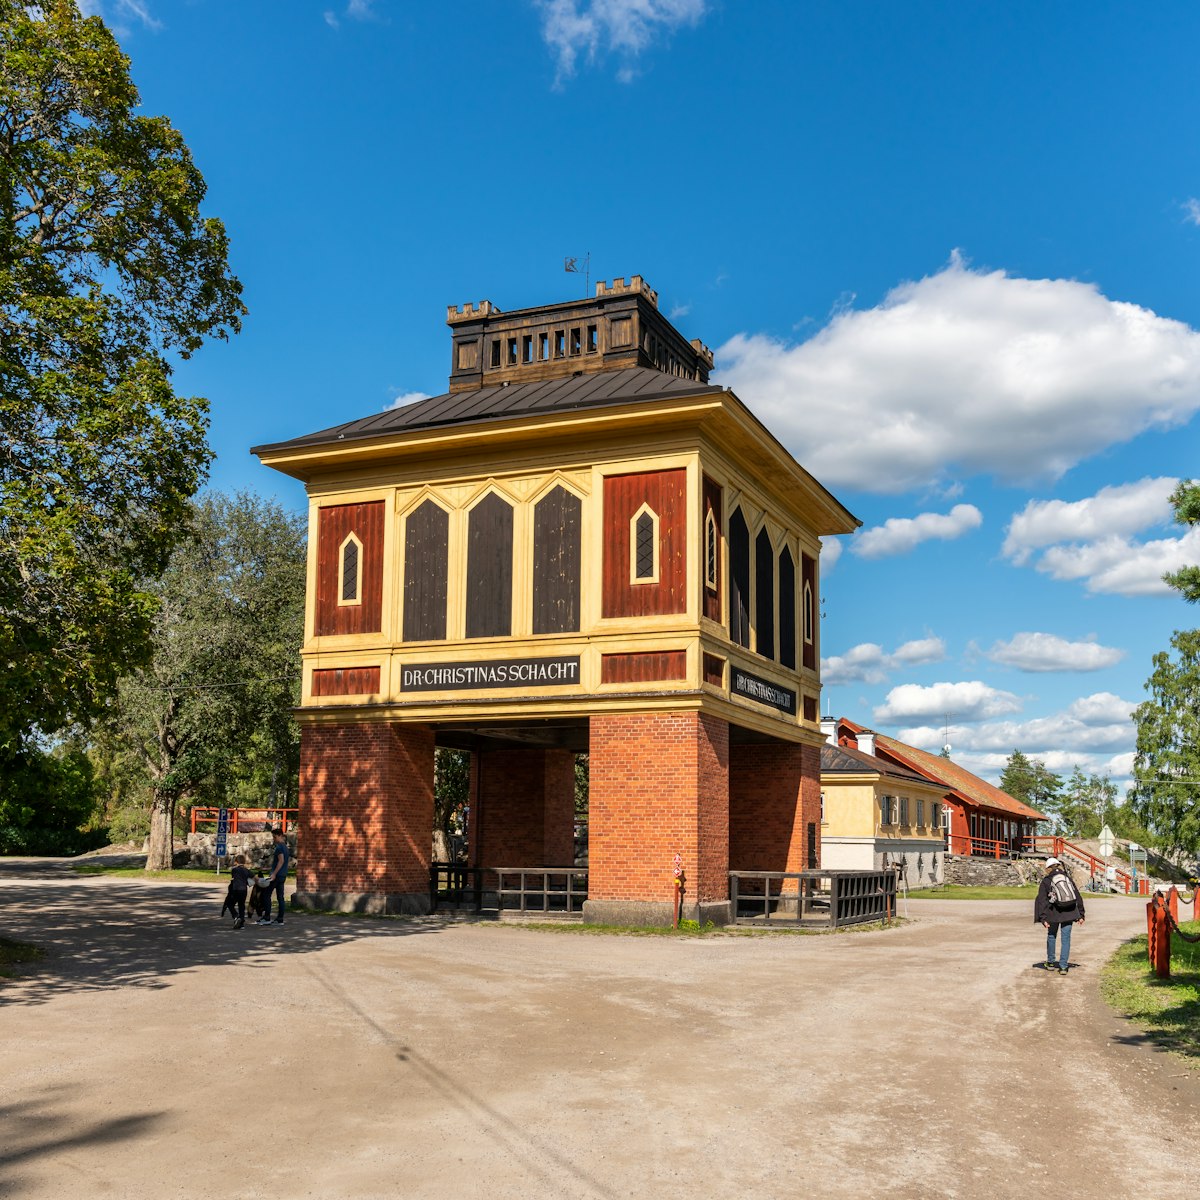 The Queen Christinas shaft building at Sala silver mine in Sala, Sweden.